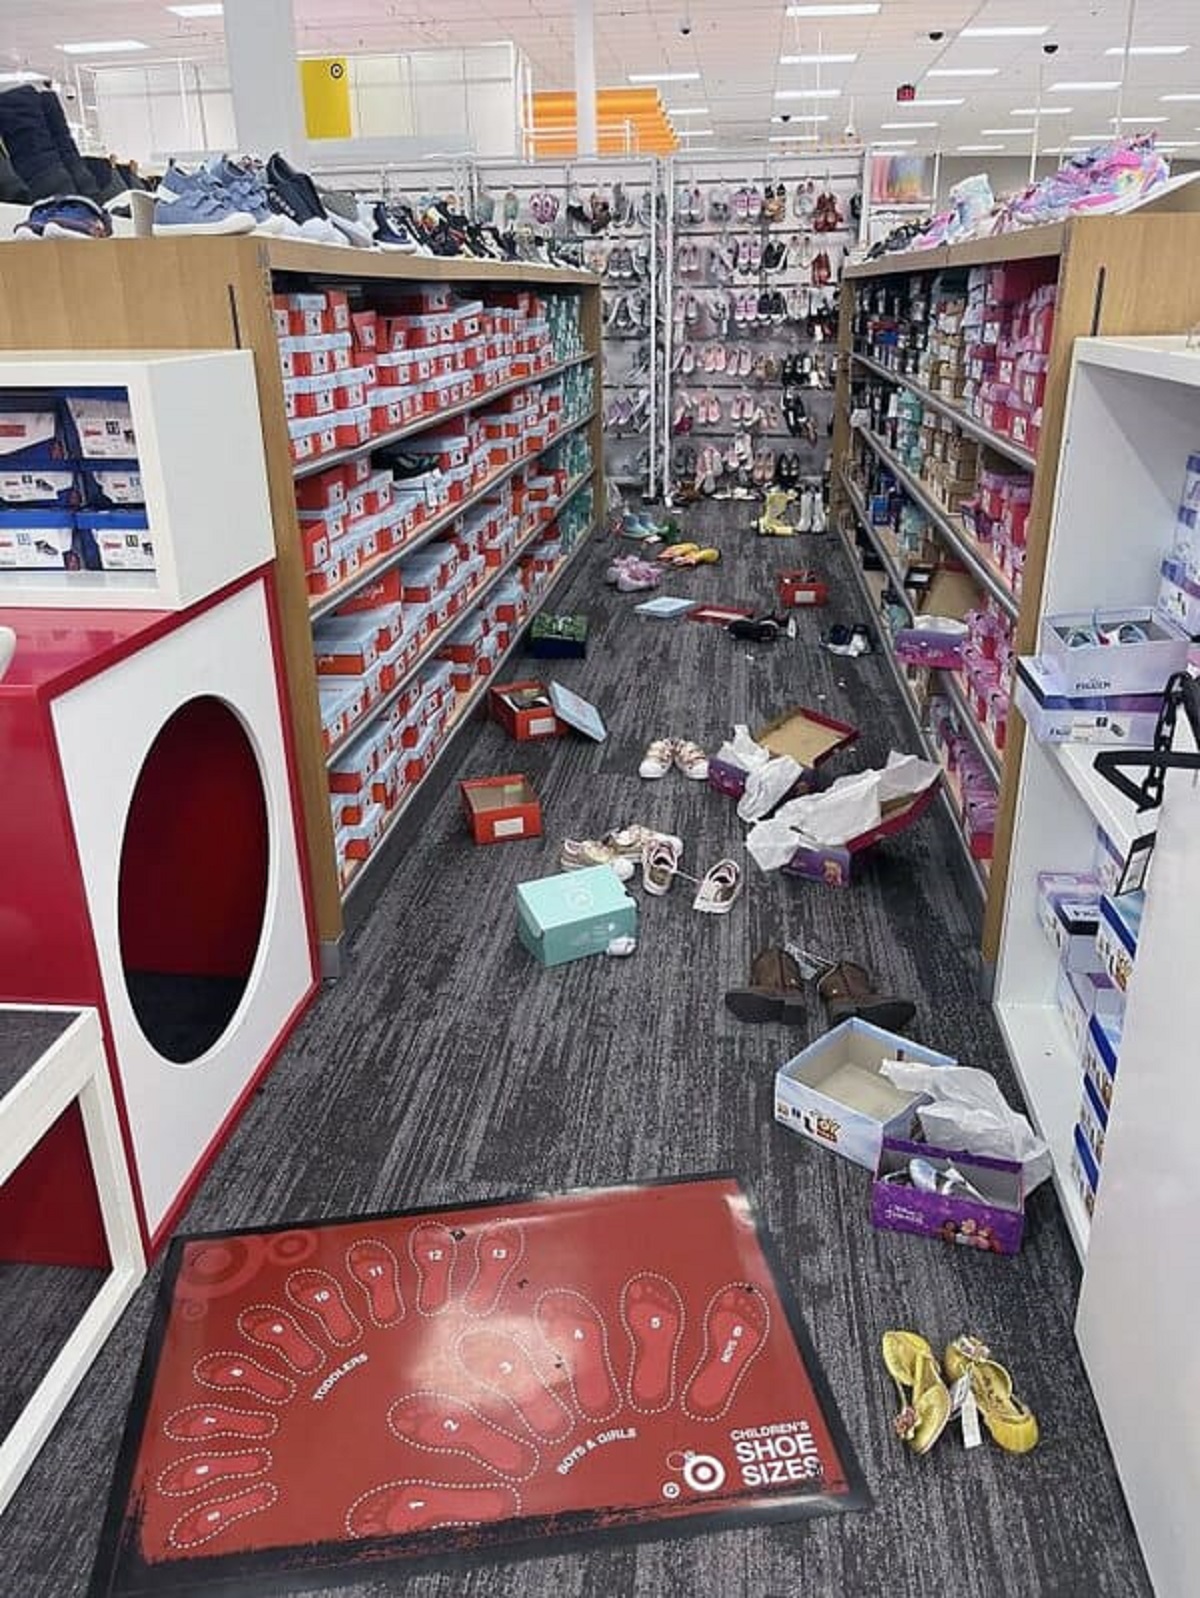 “The Way A Mom And Her Two Kids Left The Shoe Aisle In Target”